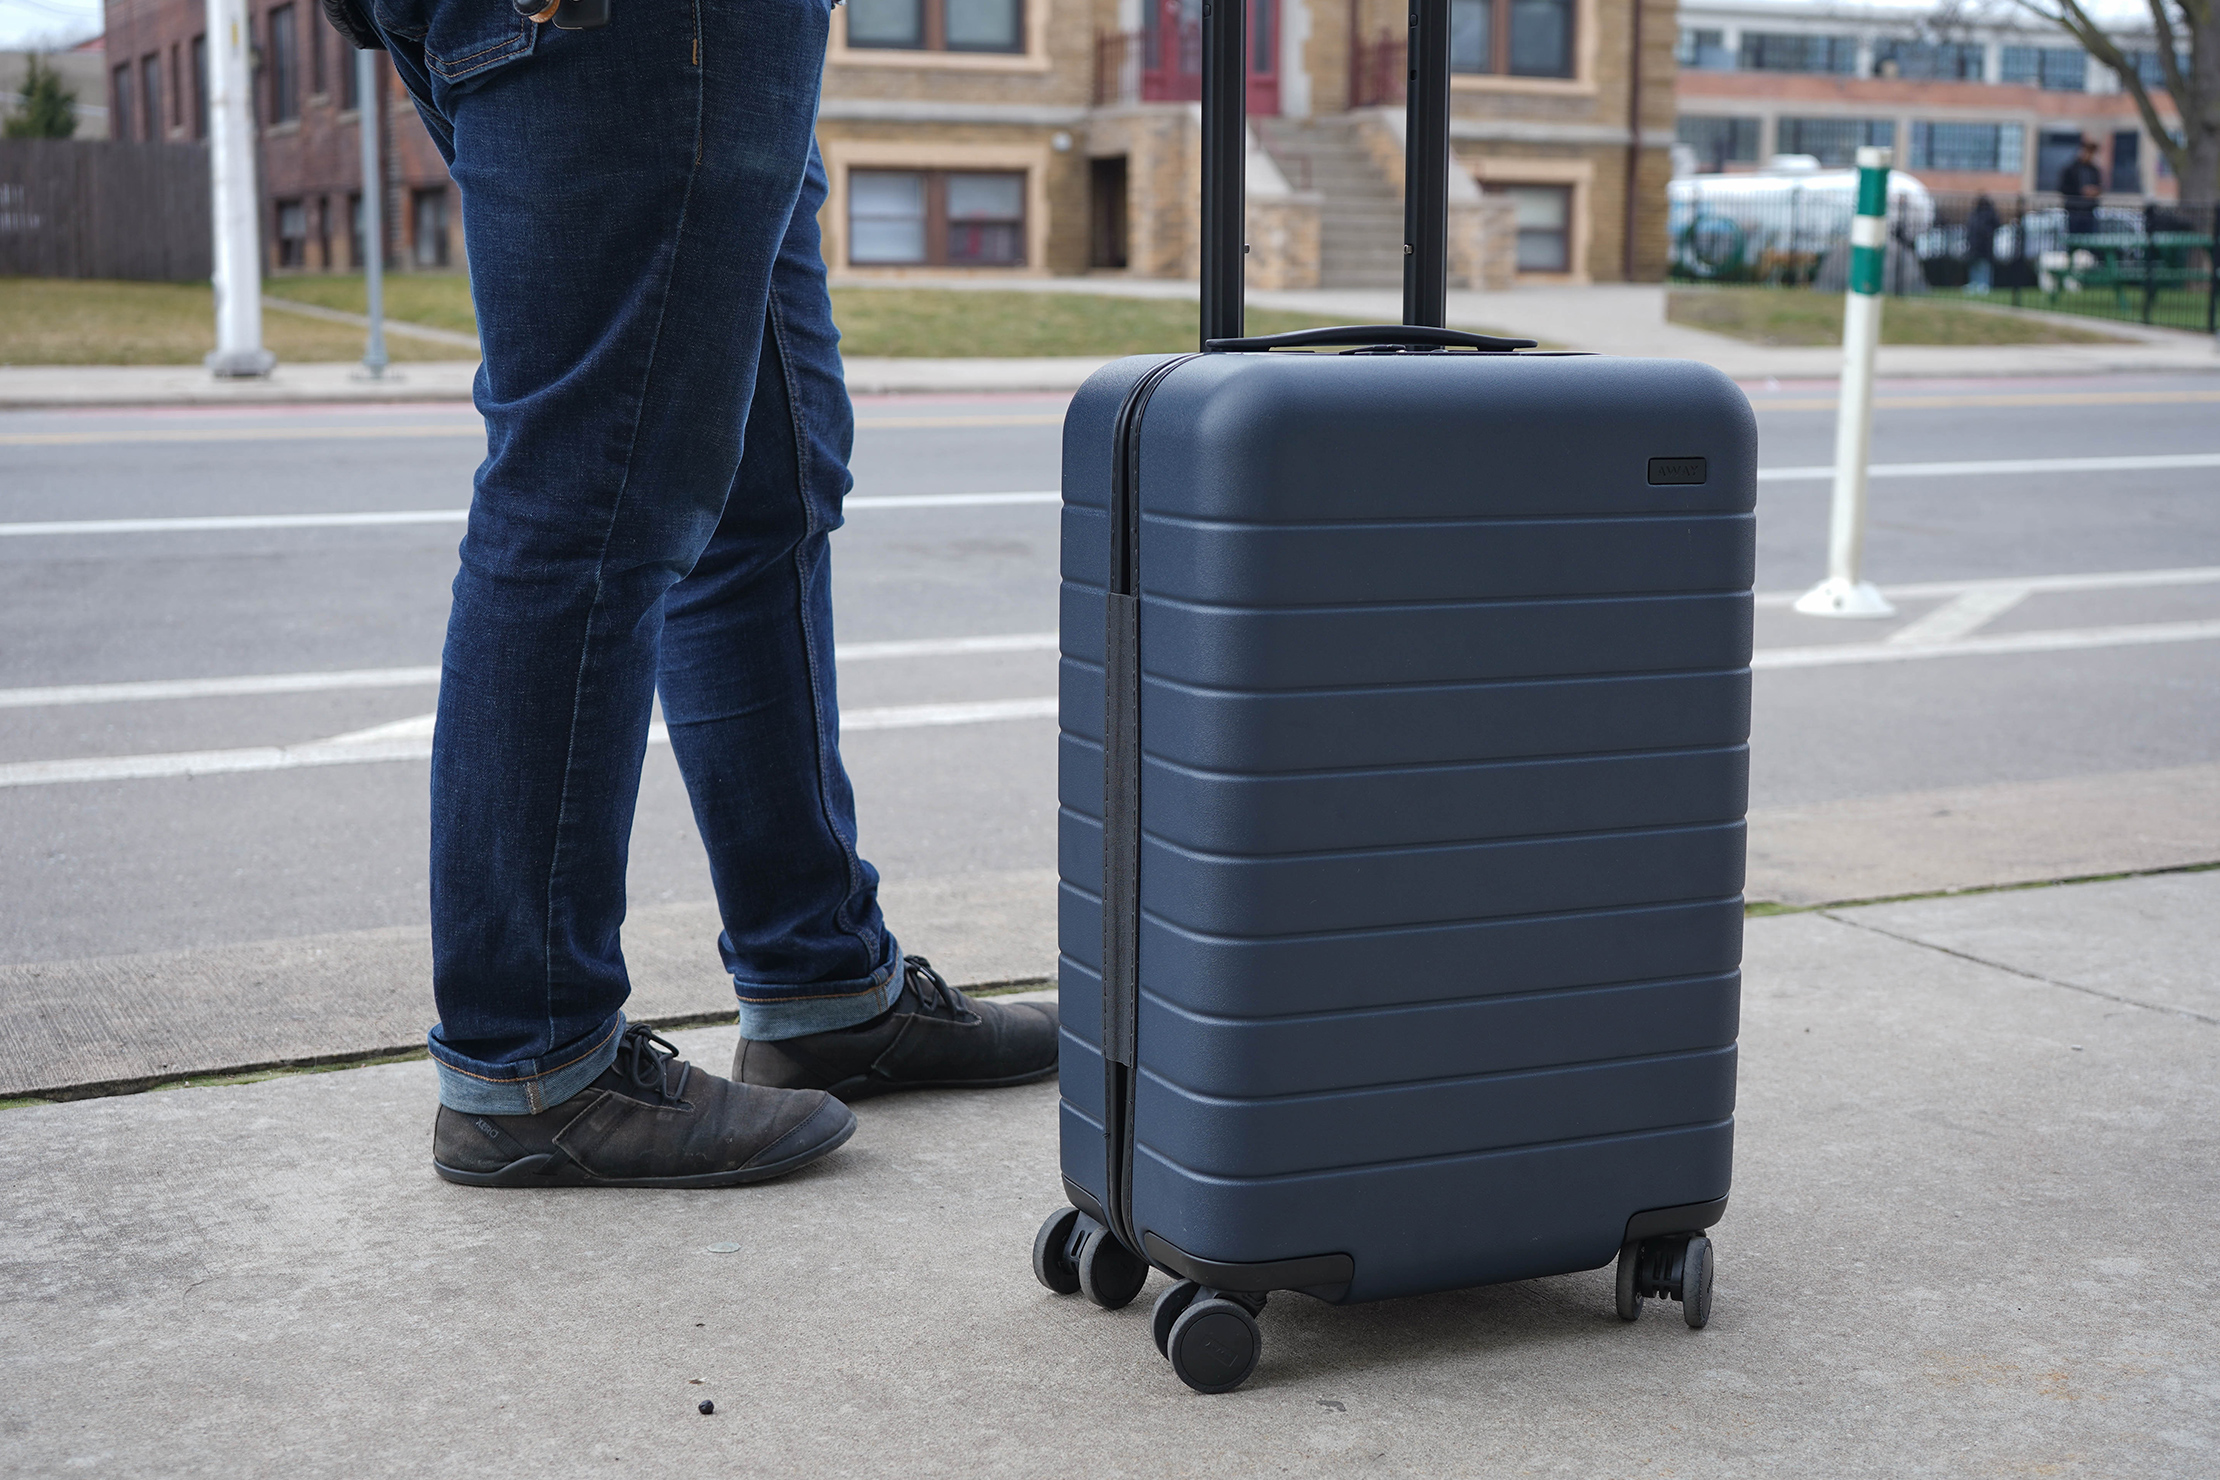 I Bought Away Carry-On Luggage To See If It Was Worth The Price